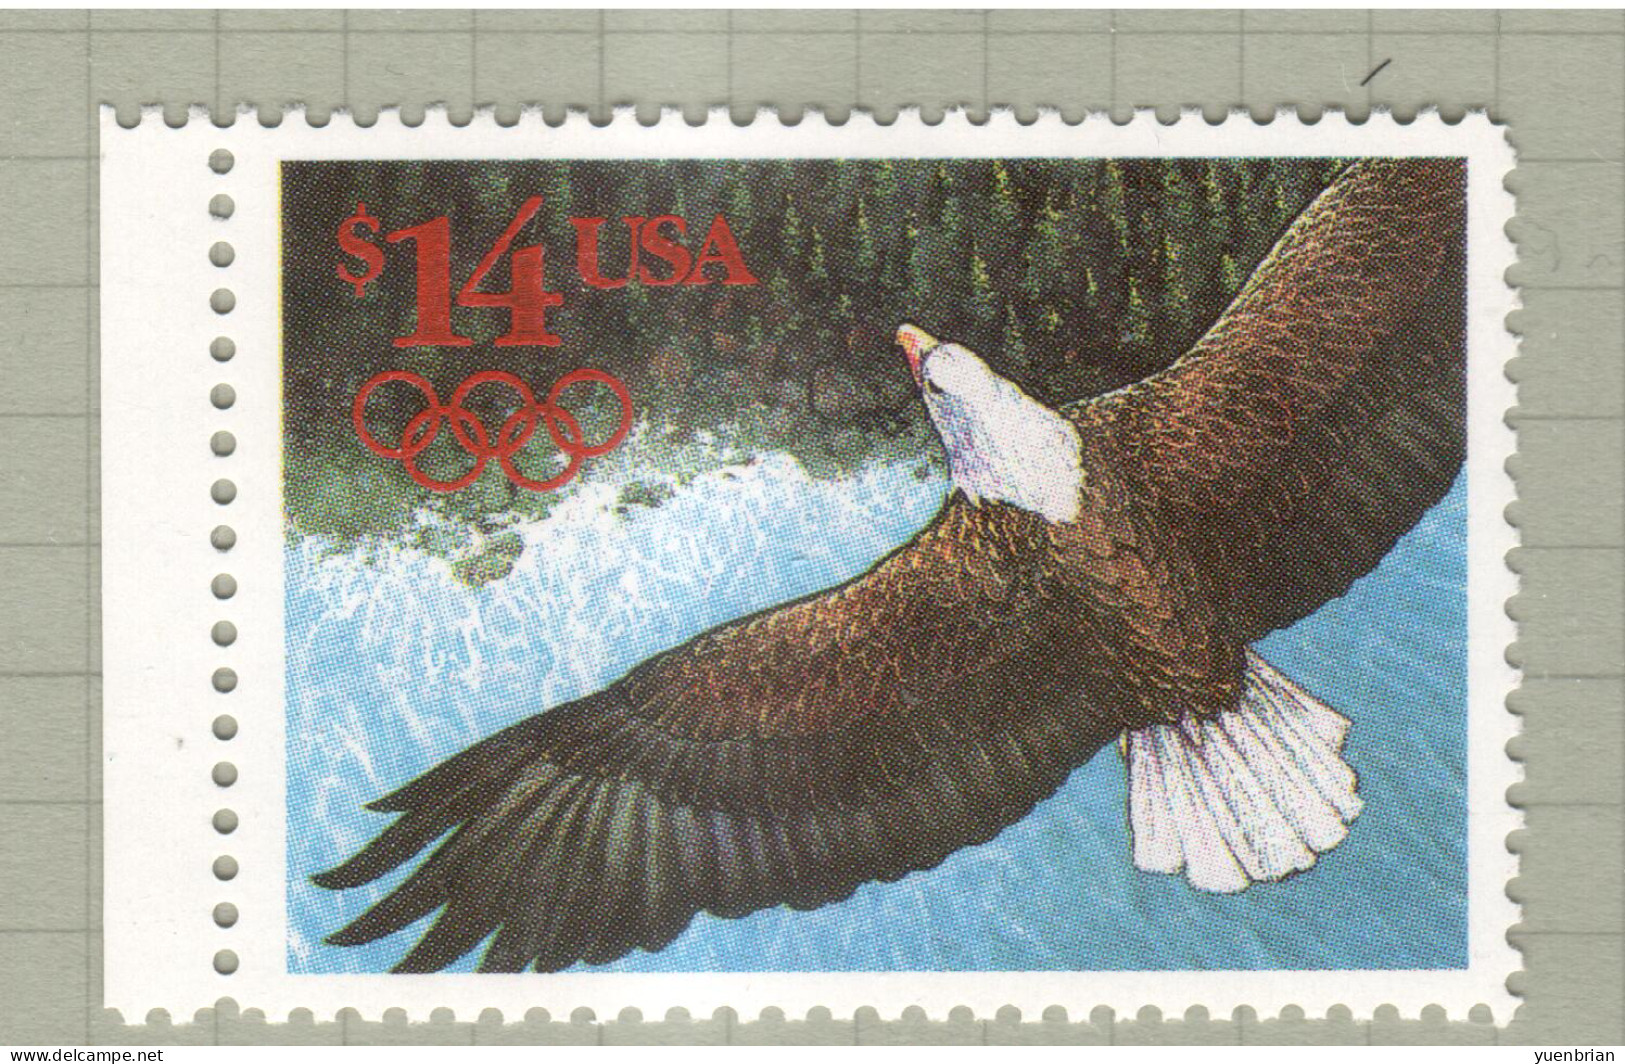 USA 1991, Bird, Birds, American Bald Eagle, 1v, MNH**, Excellent Condition - Arends & Roofvogels